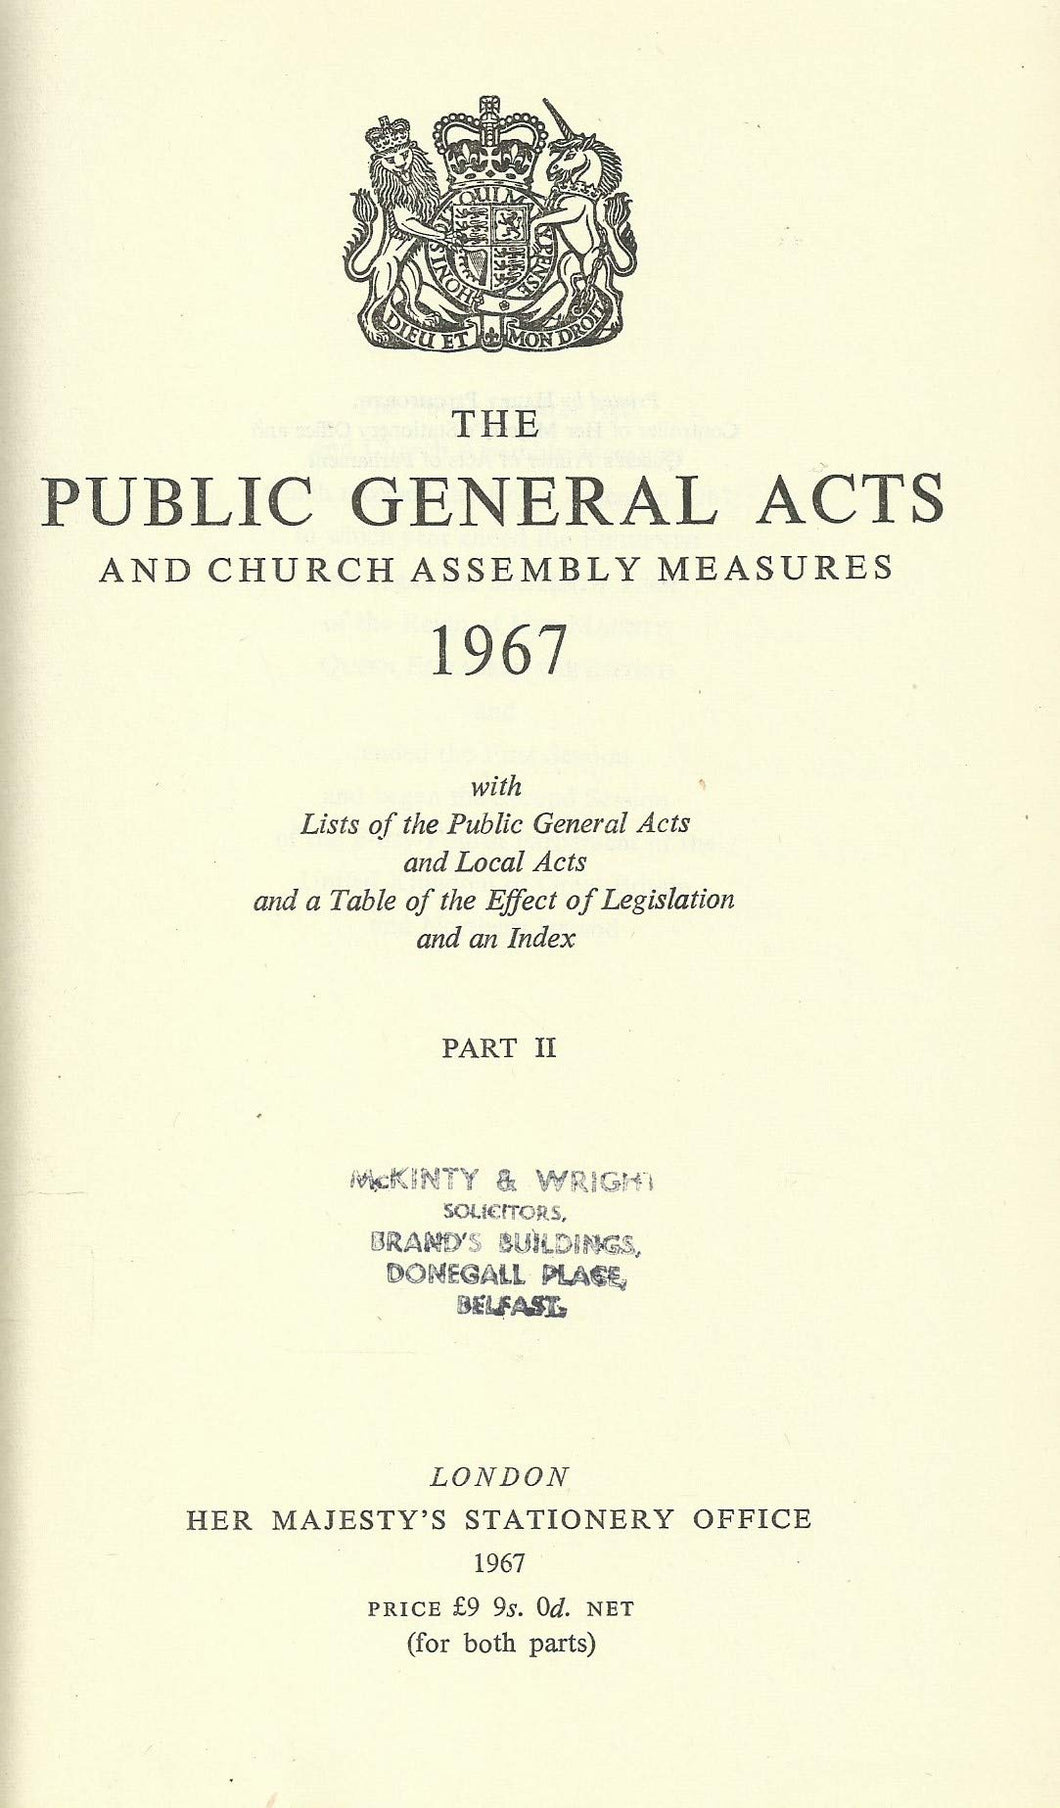 The Public General Acts and Measures of 1967 - Part II